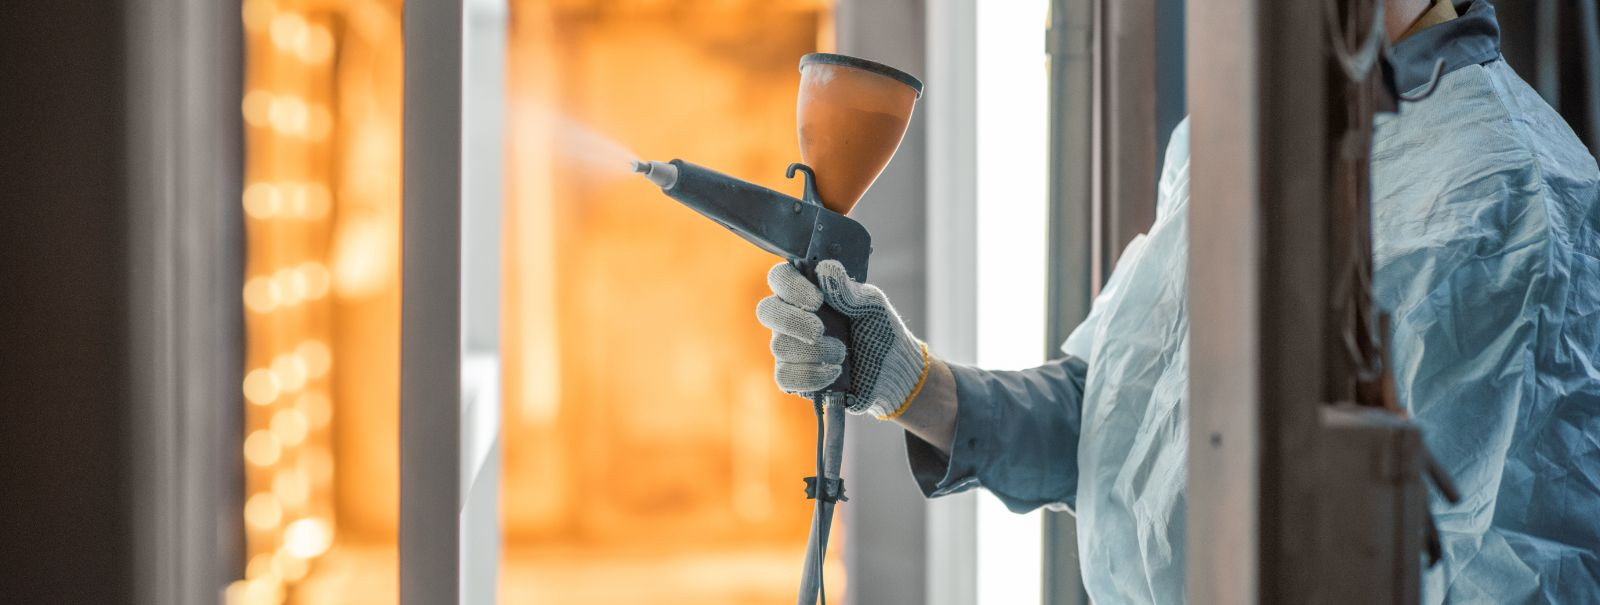 Powder coating is a dry finishing process where a powder material is electrostatically applied to a surface and then cured under heat to form a skin-like coatin